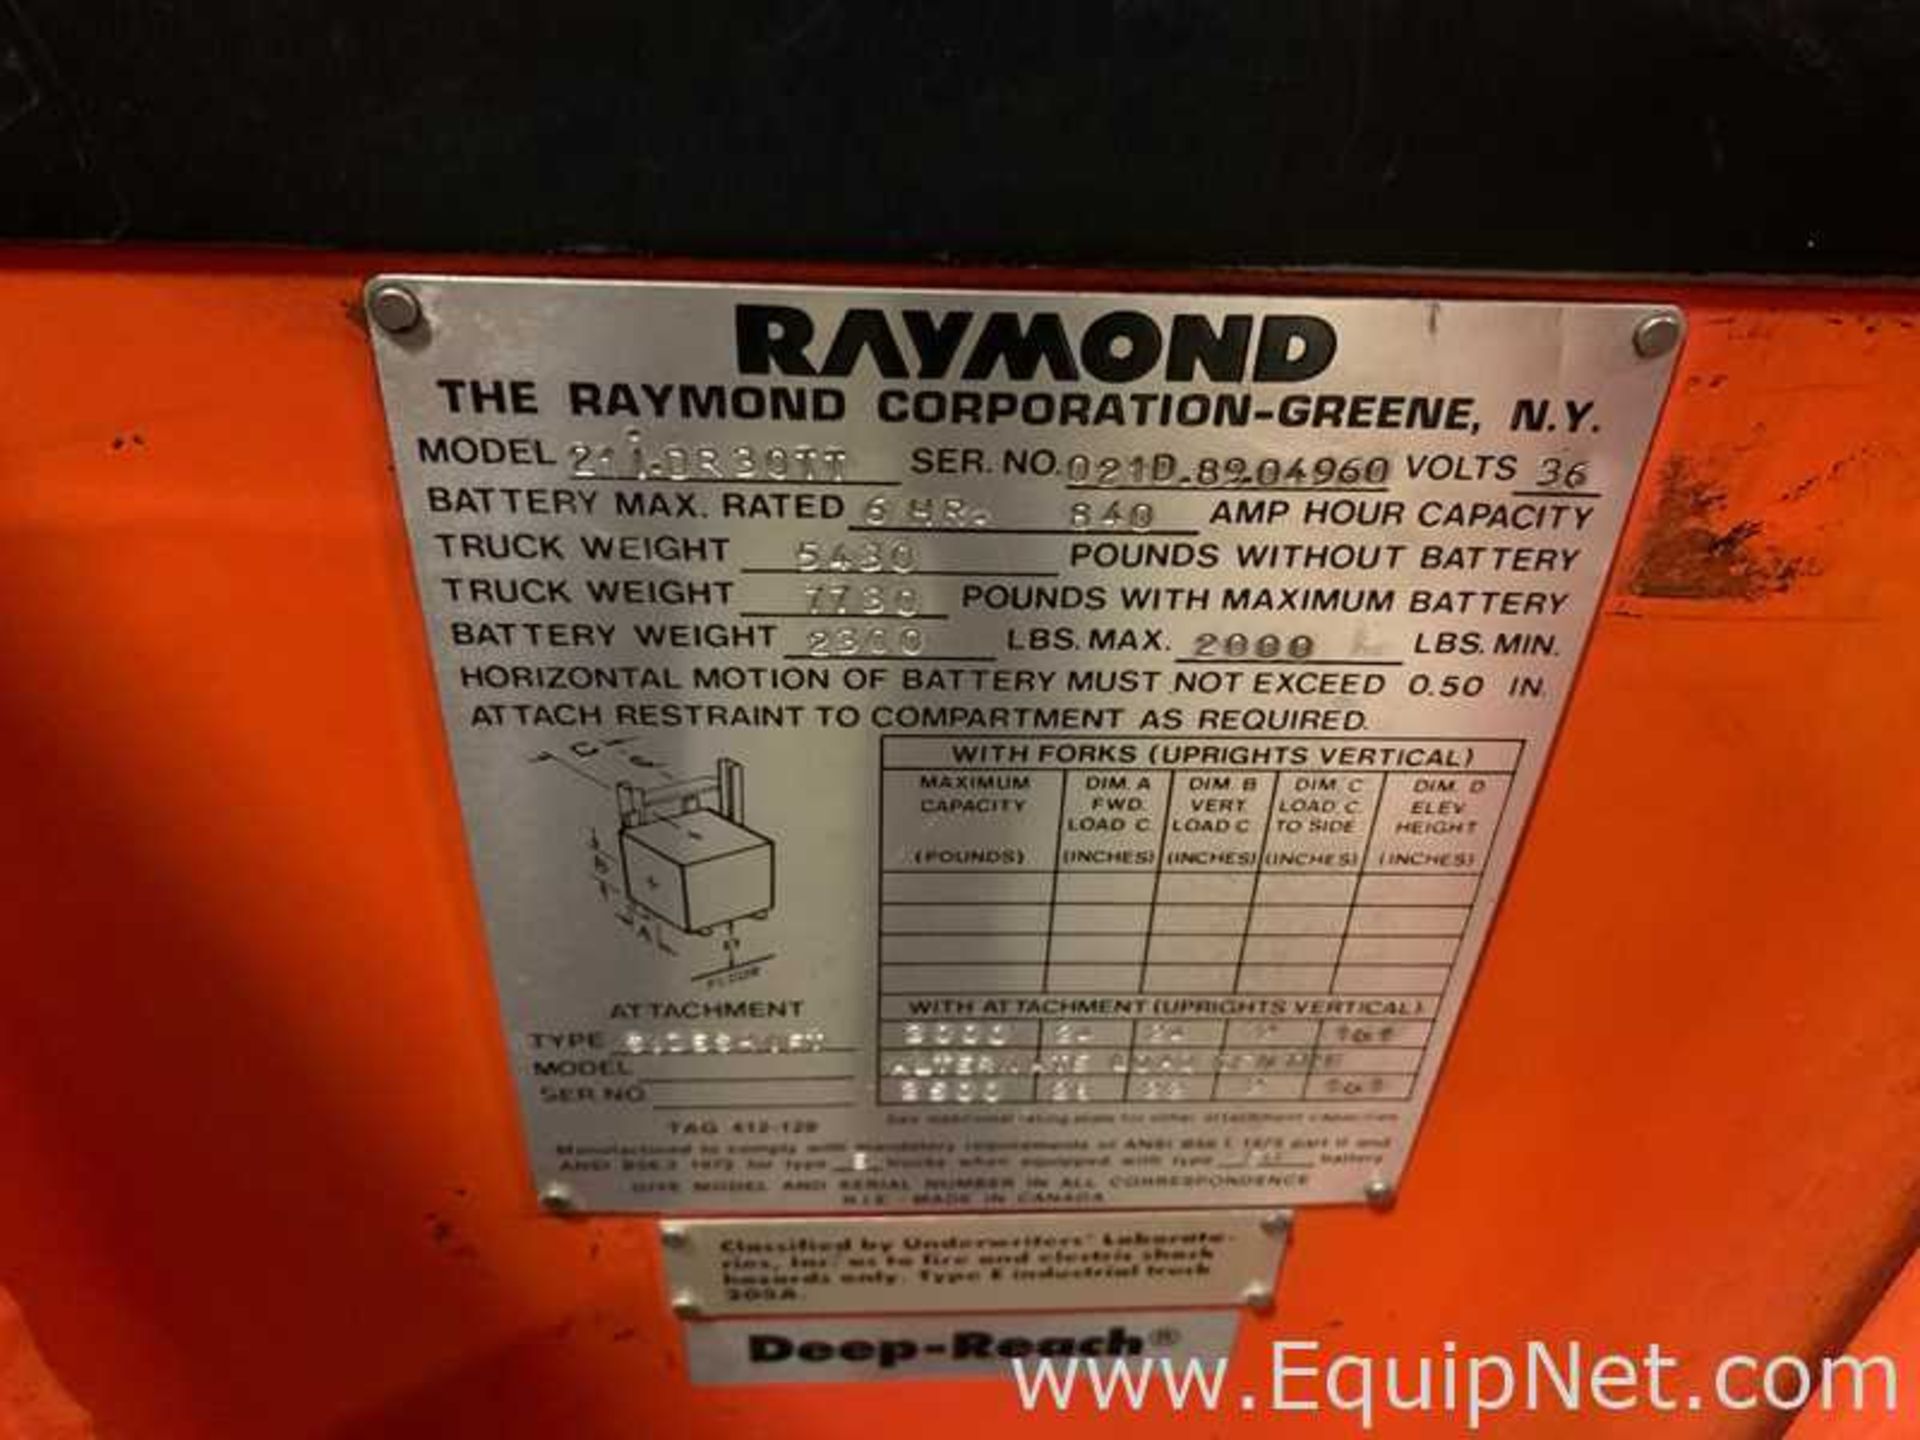 Raymond 21i-DR30TT Stand Up Reach Electric Fork Lift Truck - 824 - Image 7 of 7